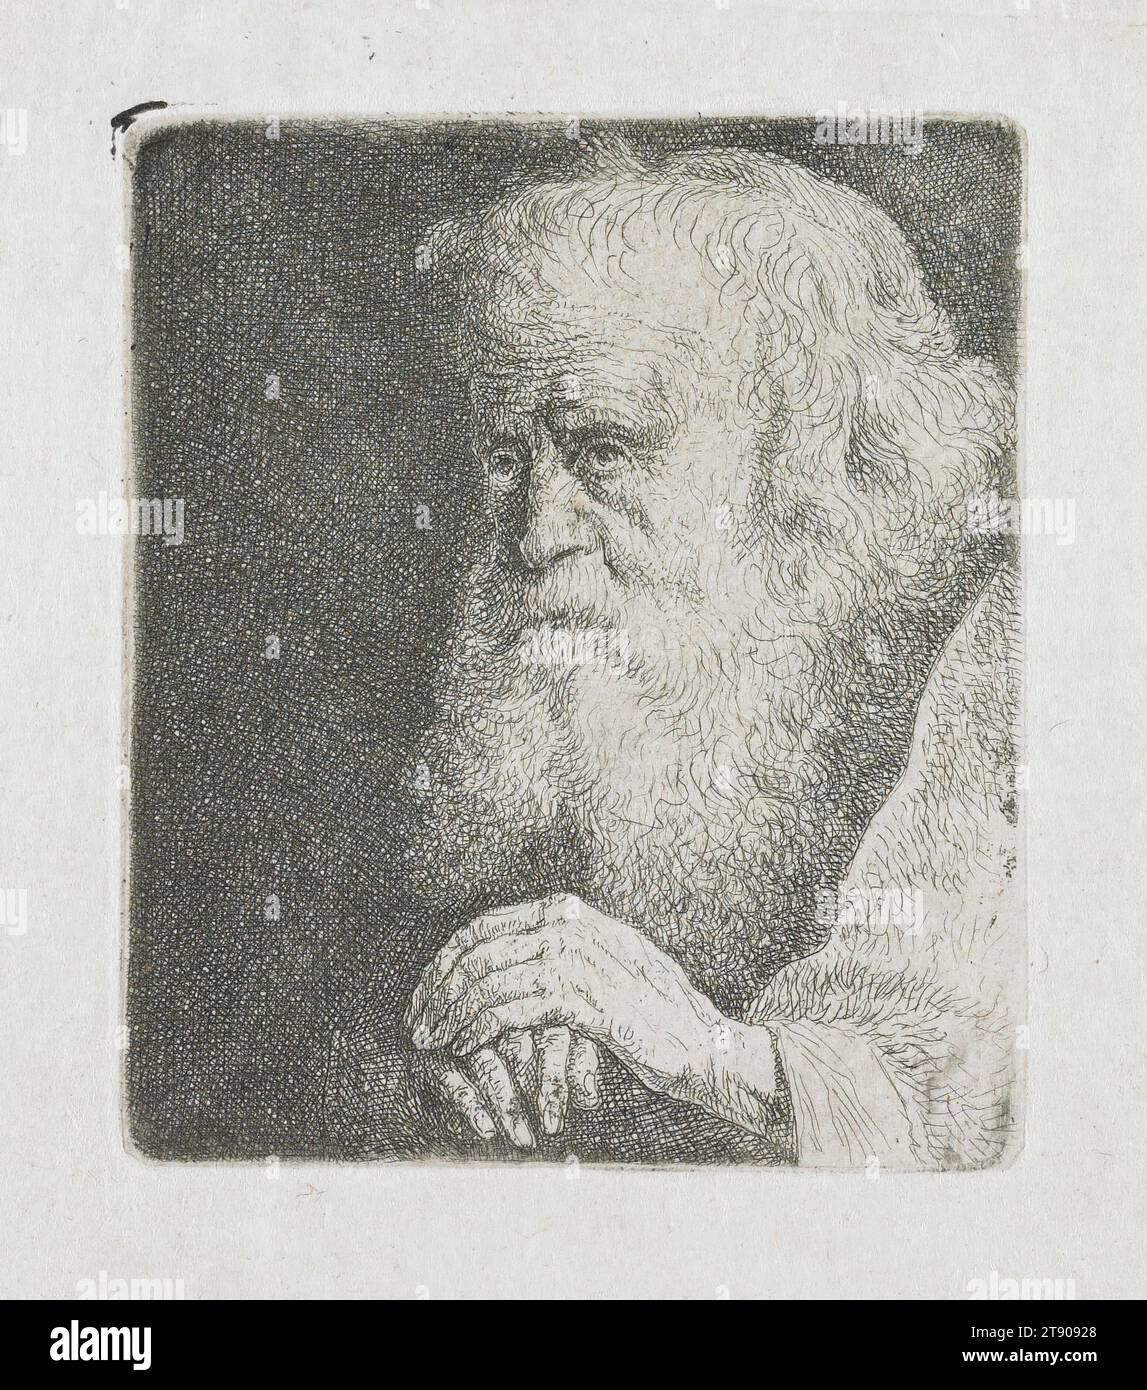 Half-Length of Man with White Beard, 1774-1789, Jean-Pierre Norblin de la Gourdaine, Polish, (born France), 1745–1830, 2 3/8 x 2 1/16 in. (6.1 x 5.2 cm) (image)3 1/8 x 2 3/4 in. (8 x 7 cm) (sheet), Etching, Poland, 18th century, Jean-Pierre Norblin de la Gourdaine was a French painter and printmaker active in Poland in the late 18th century. Norblin's charming miniature etchings, representing mostly male heads, street sellers, and vagabonds, reflect both in subject and technique the profound influence of Rembrandt's prints. Stock Photo